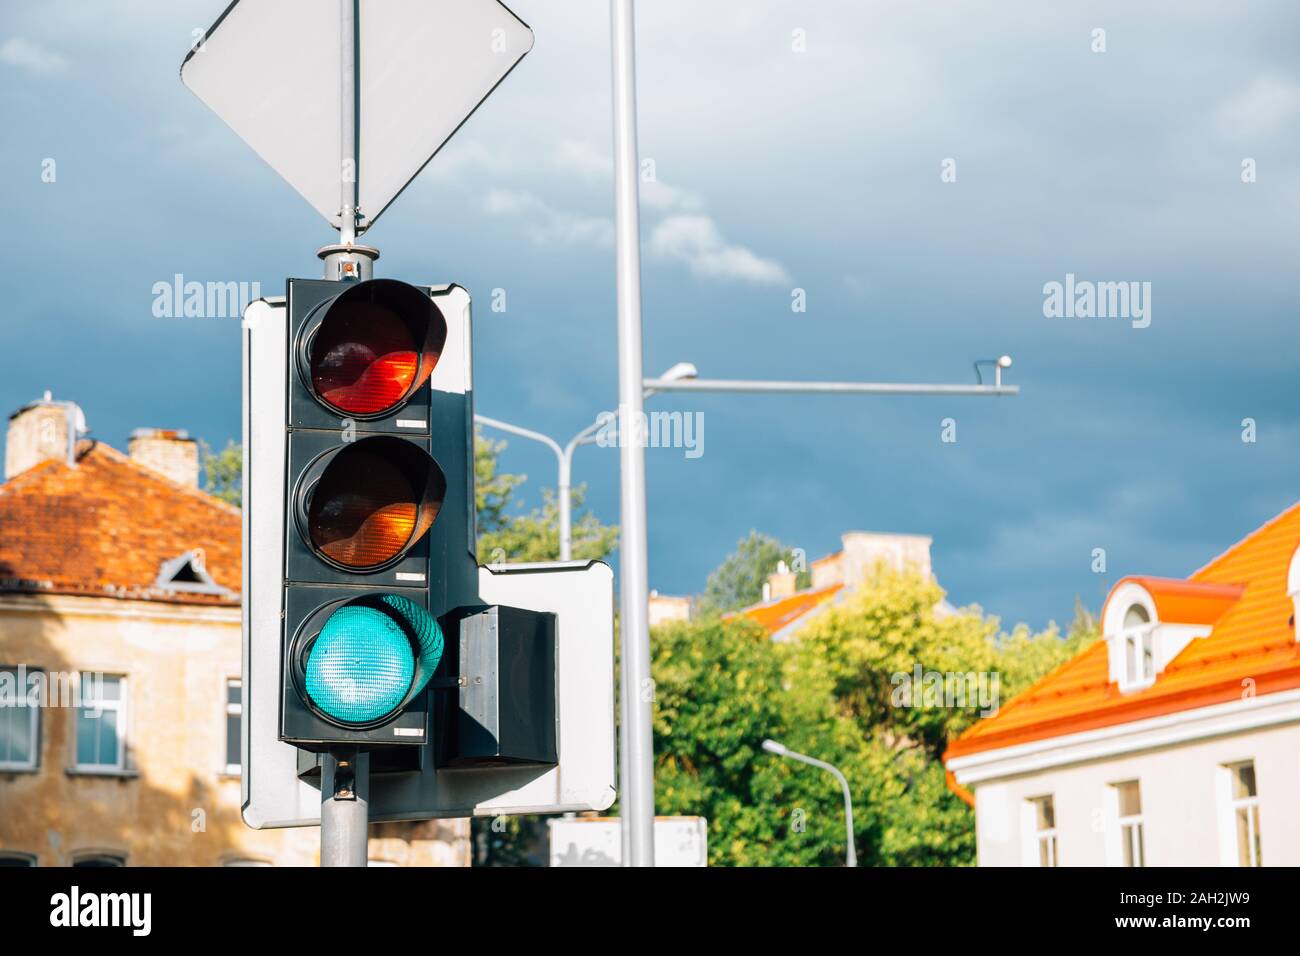 Traffic light at old town in Lithuania Stock Photo -